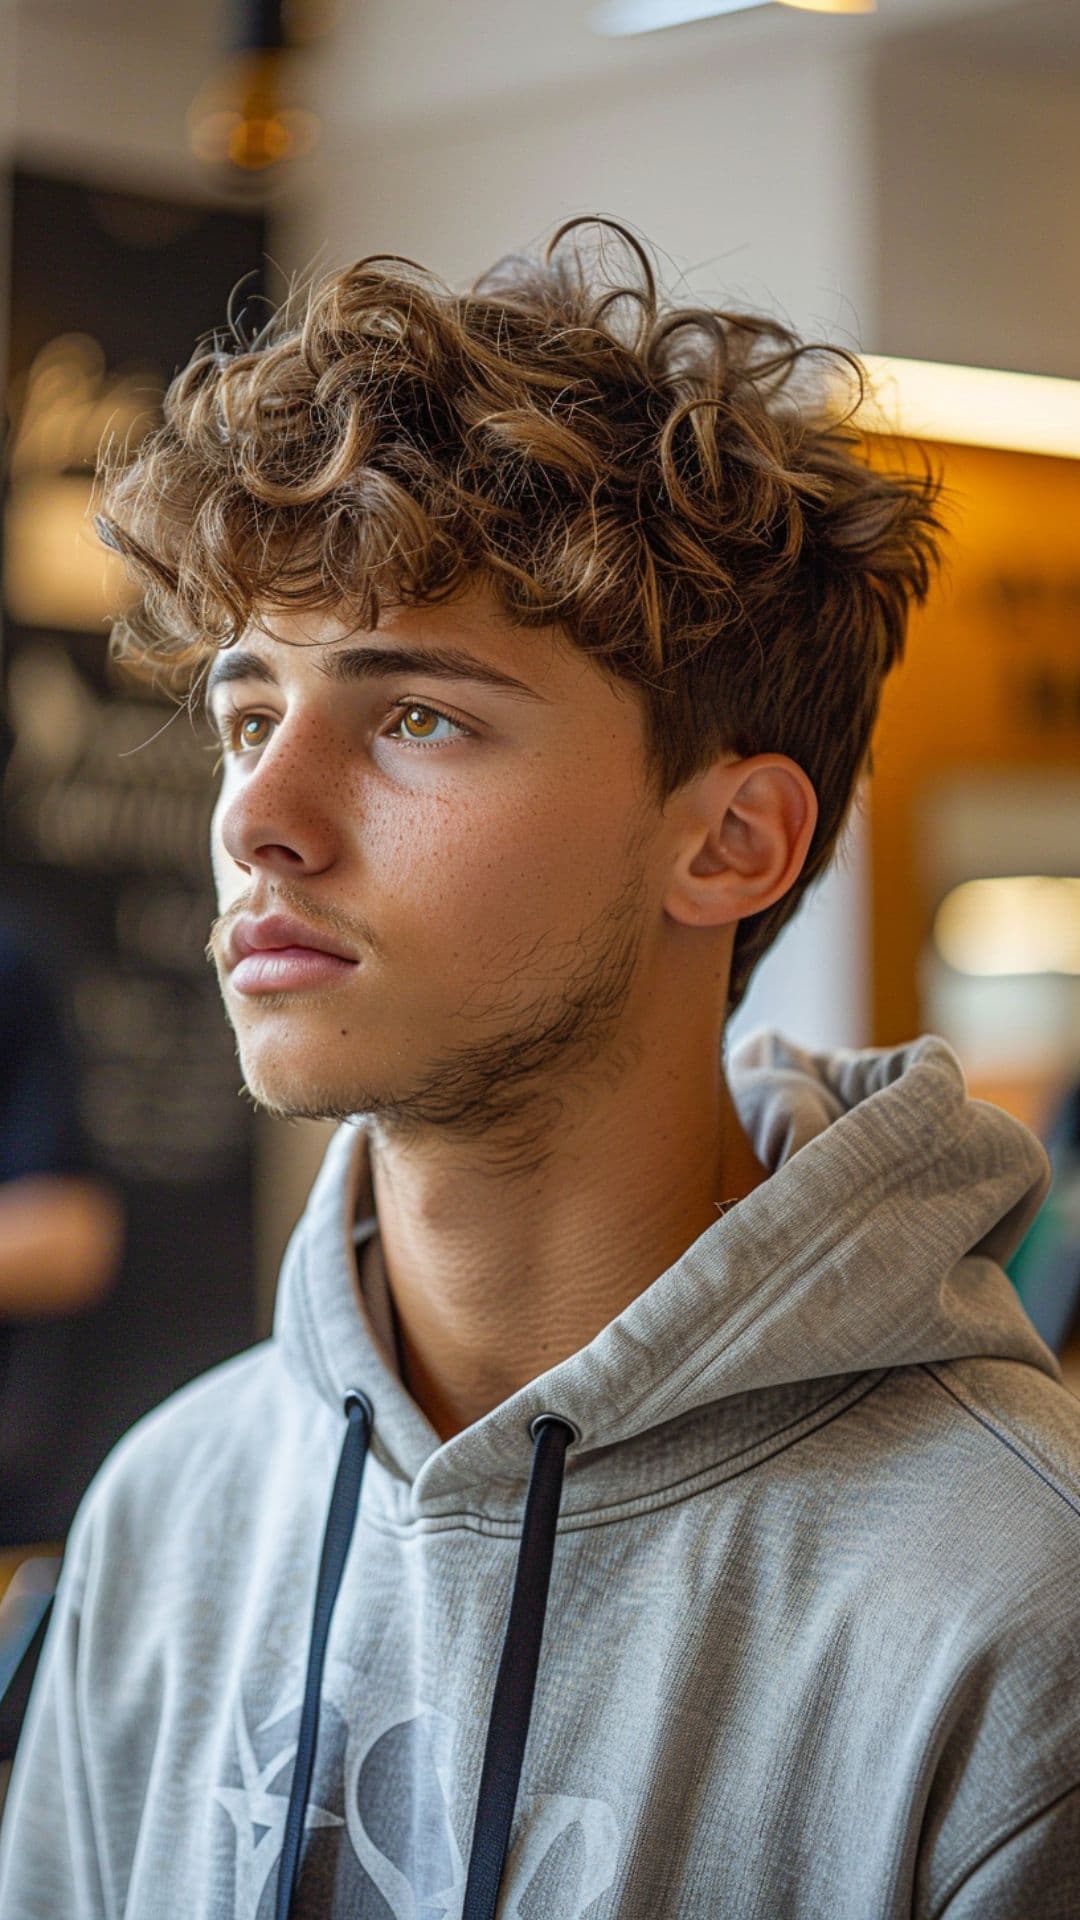 A man modelling a short and textured hair.